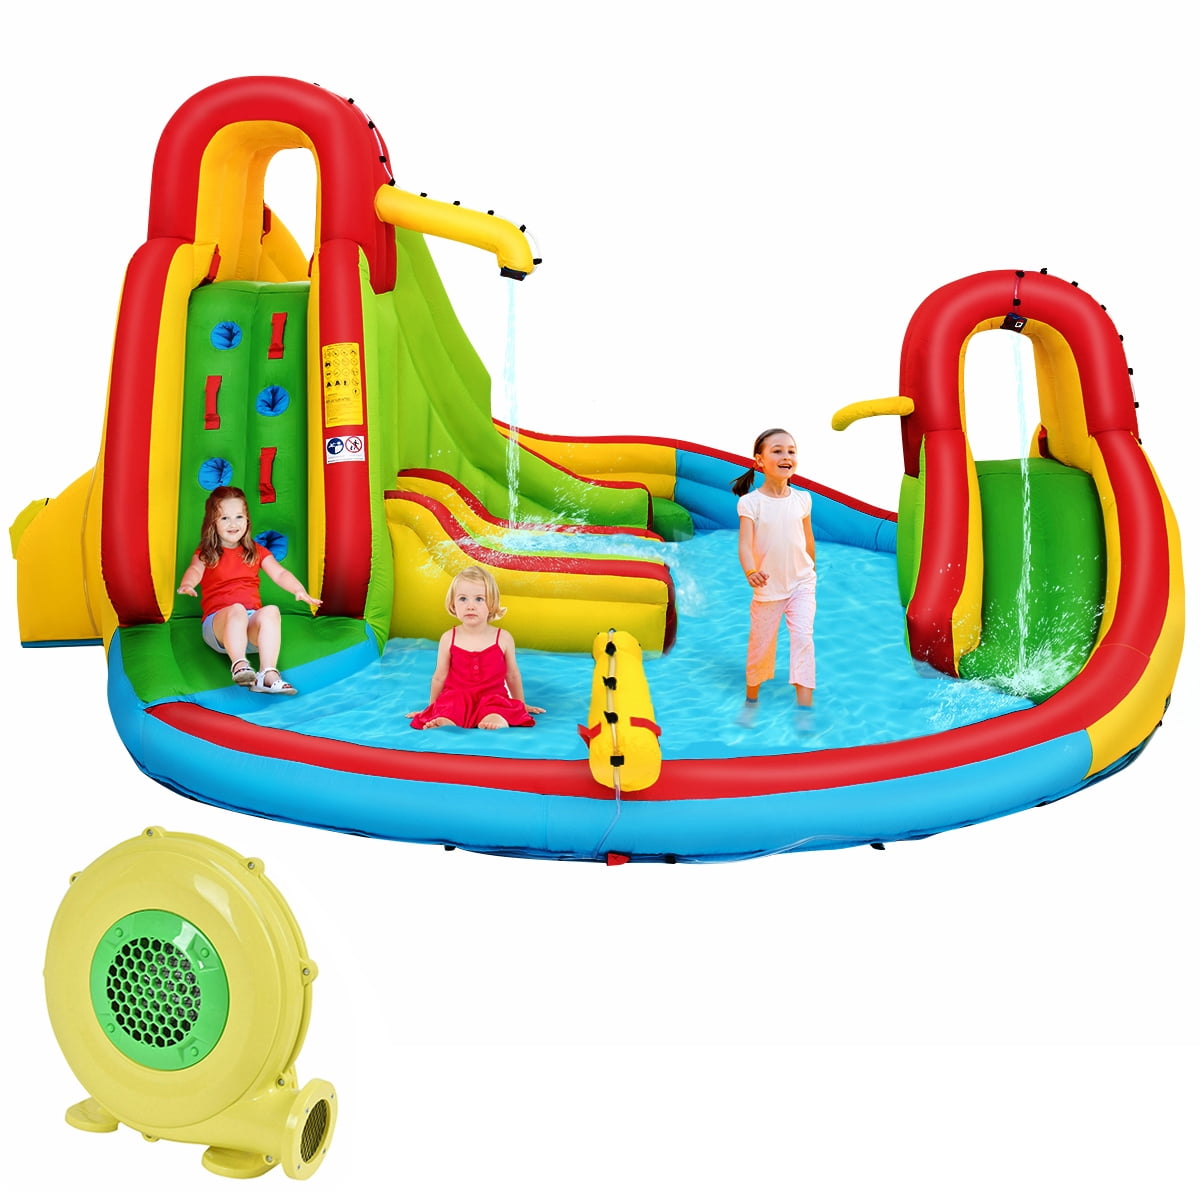 Costway Kids Inflatable Water Slide, Bounce Park, Splash Pool with Water Cannon